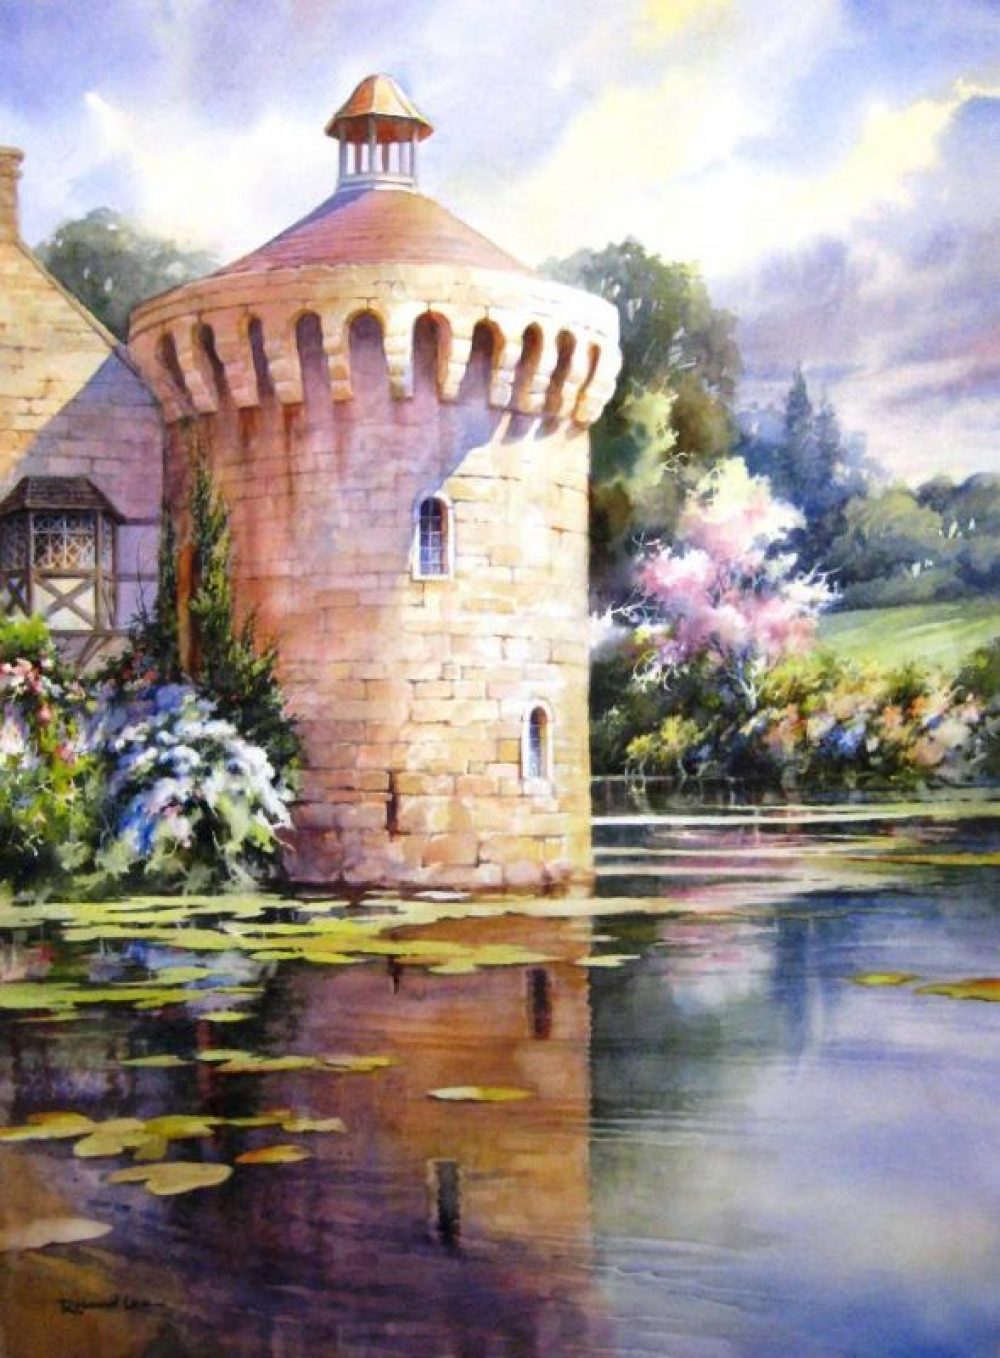 Scotney Tower in Kent England - Painting of Scotney Tower